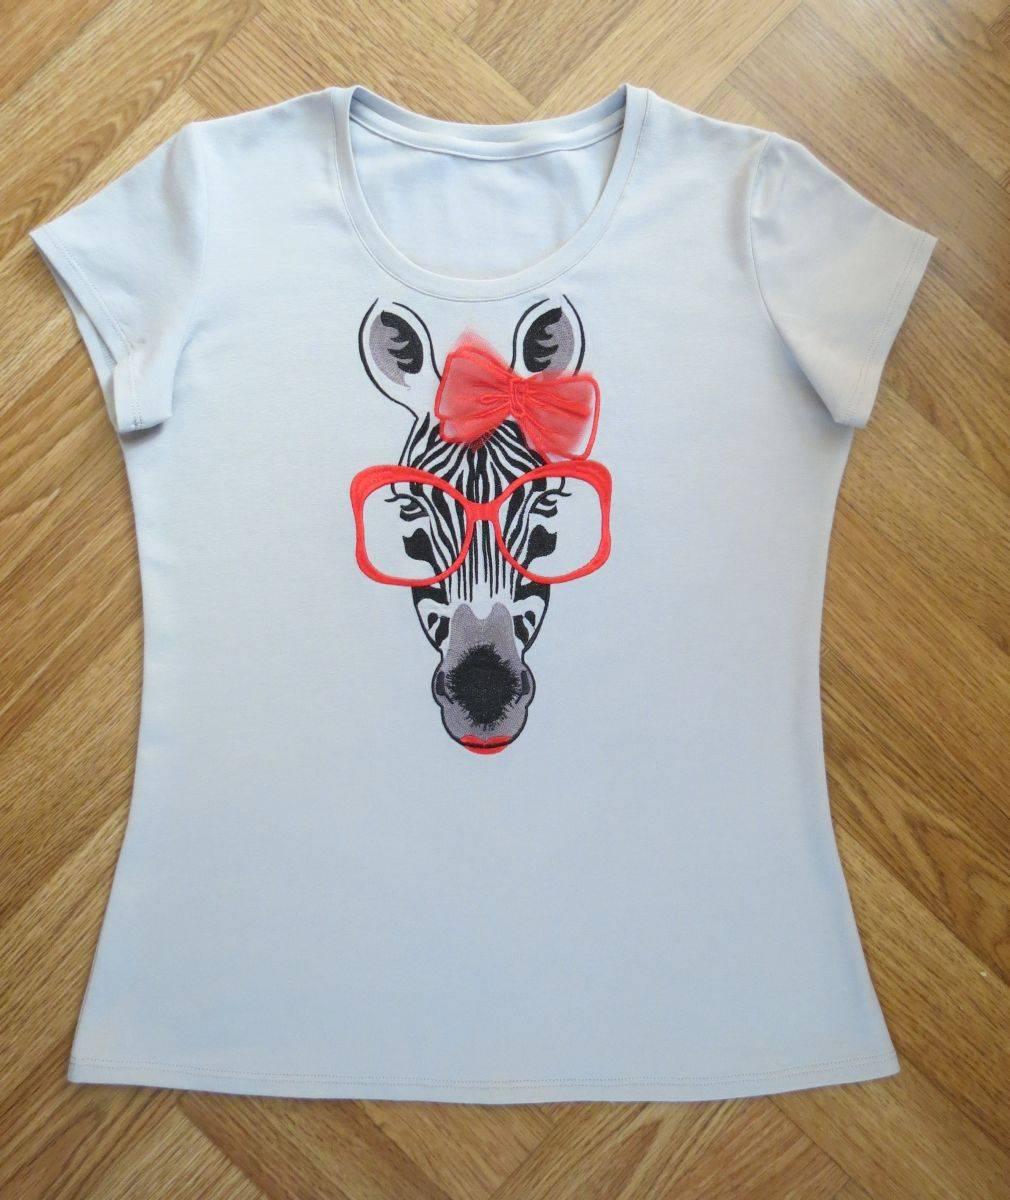 Embroidered shirt with zebra free design